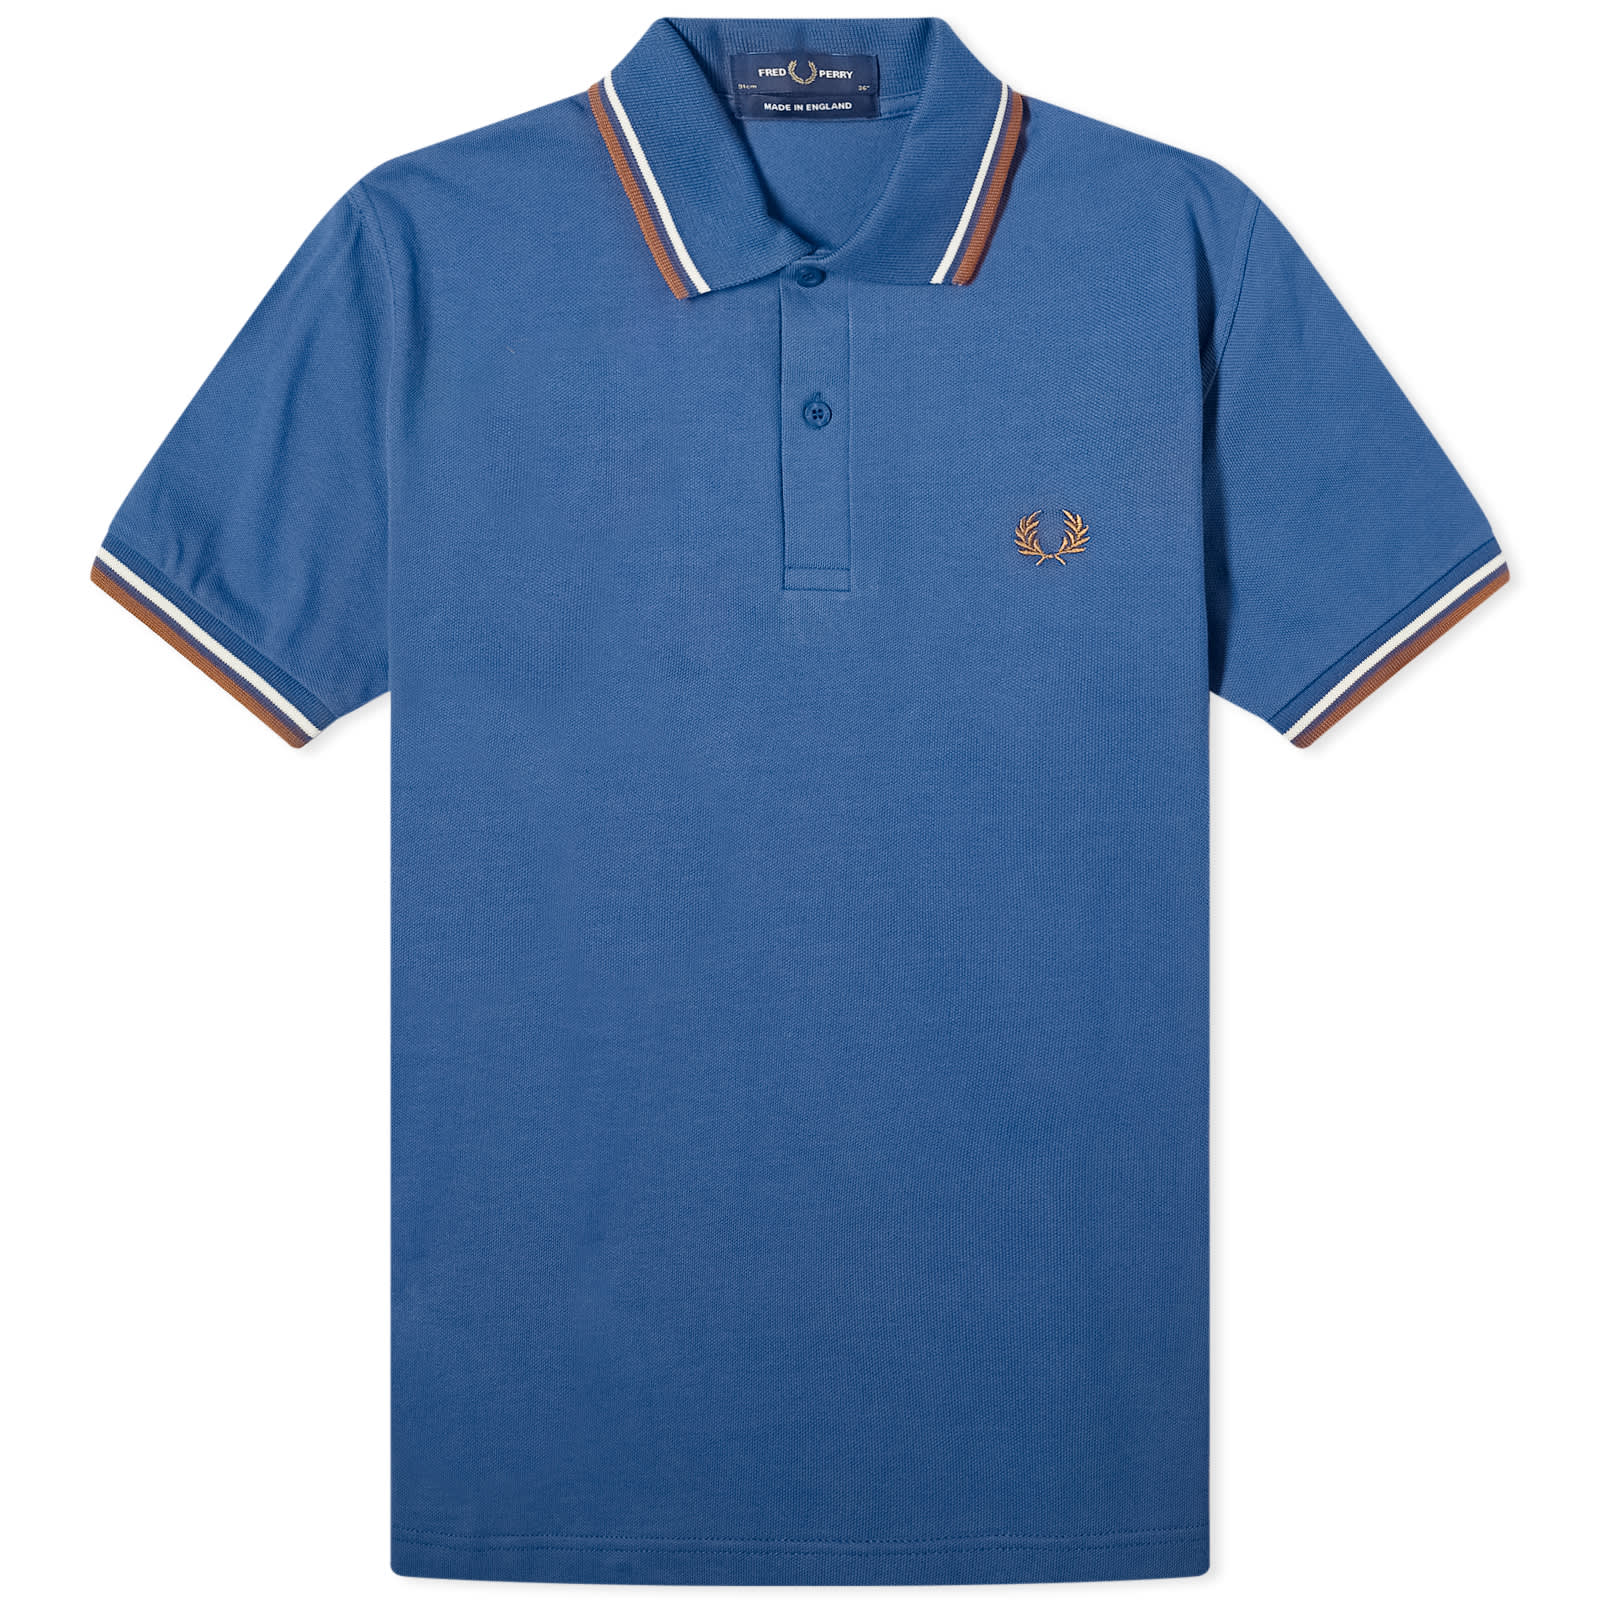 Поло Fred Perry Twin Tipped, цвет Blue, Ecru & Caramel футболка fred perry authentic twin tipped бордовый